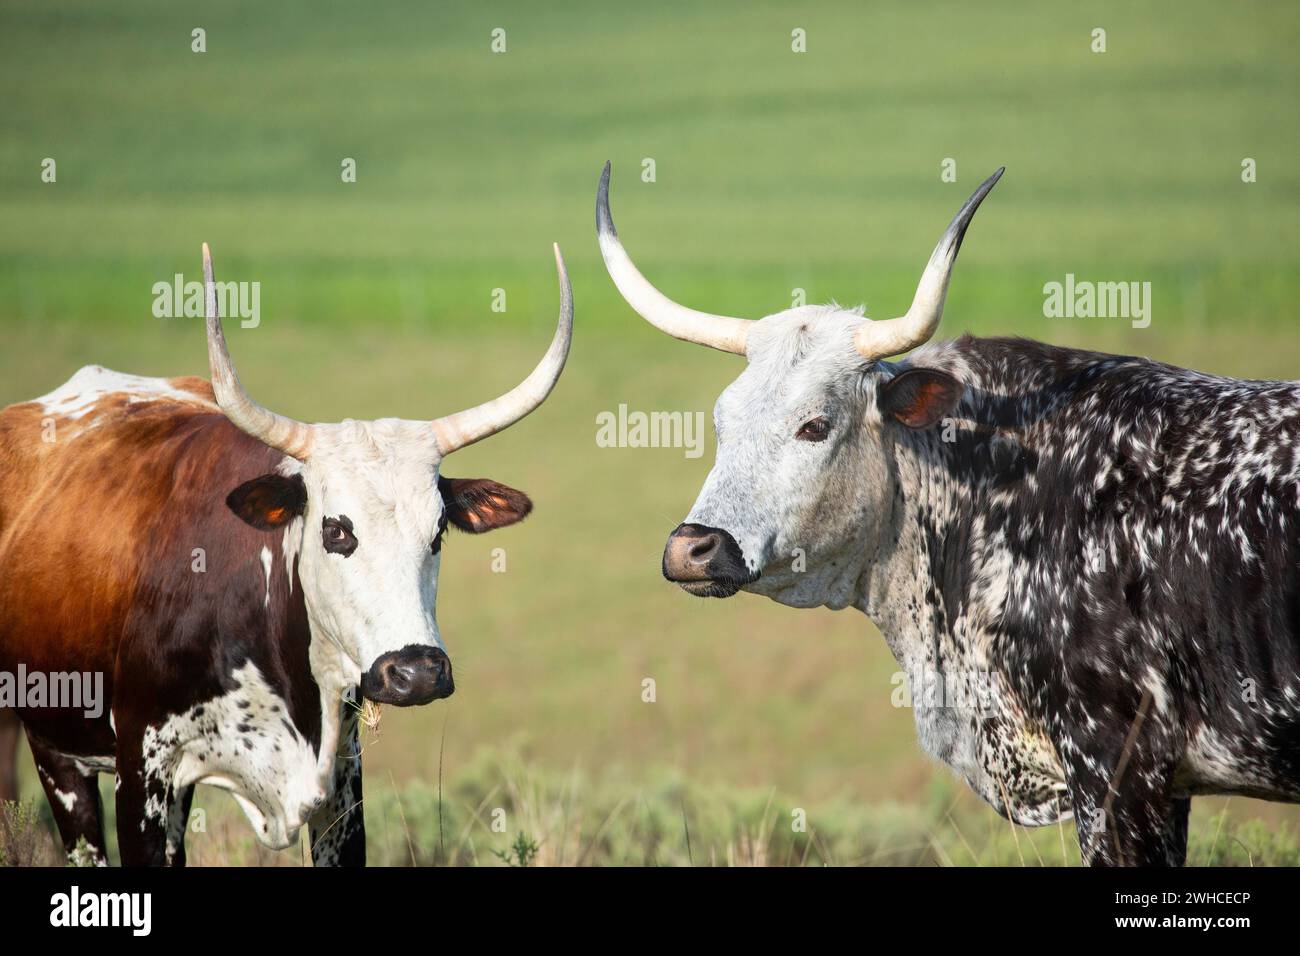 South Africa, Western Cape Province, Overstrand, cow, Nguni Cow, domestic animal, agriculture, farm, cattle breed indigenous to Southern Africa Stock Photo